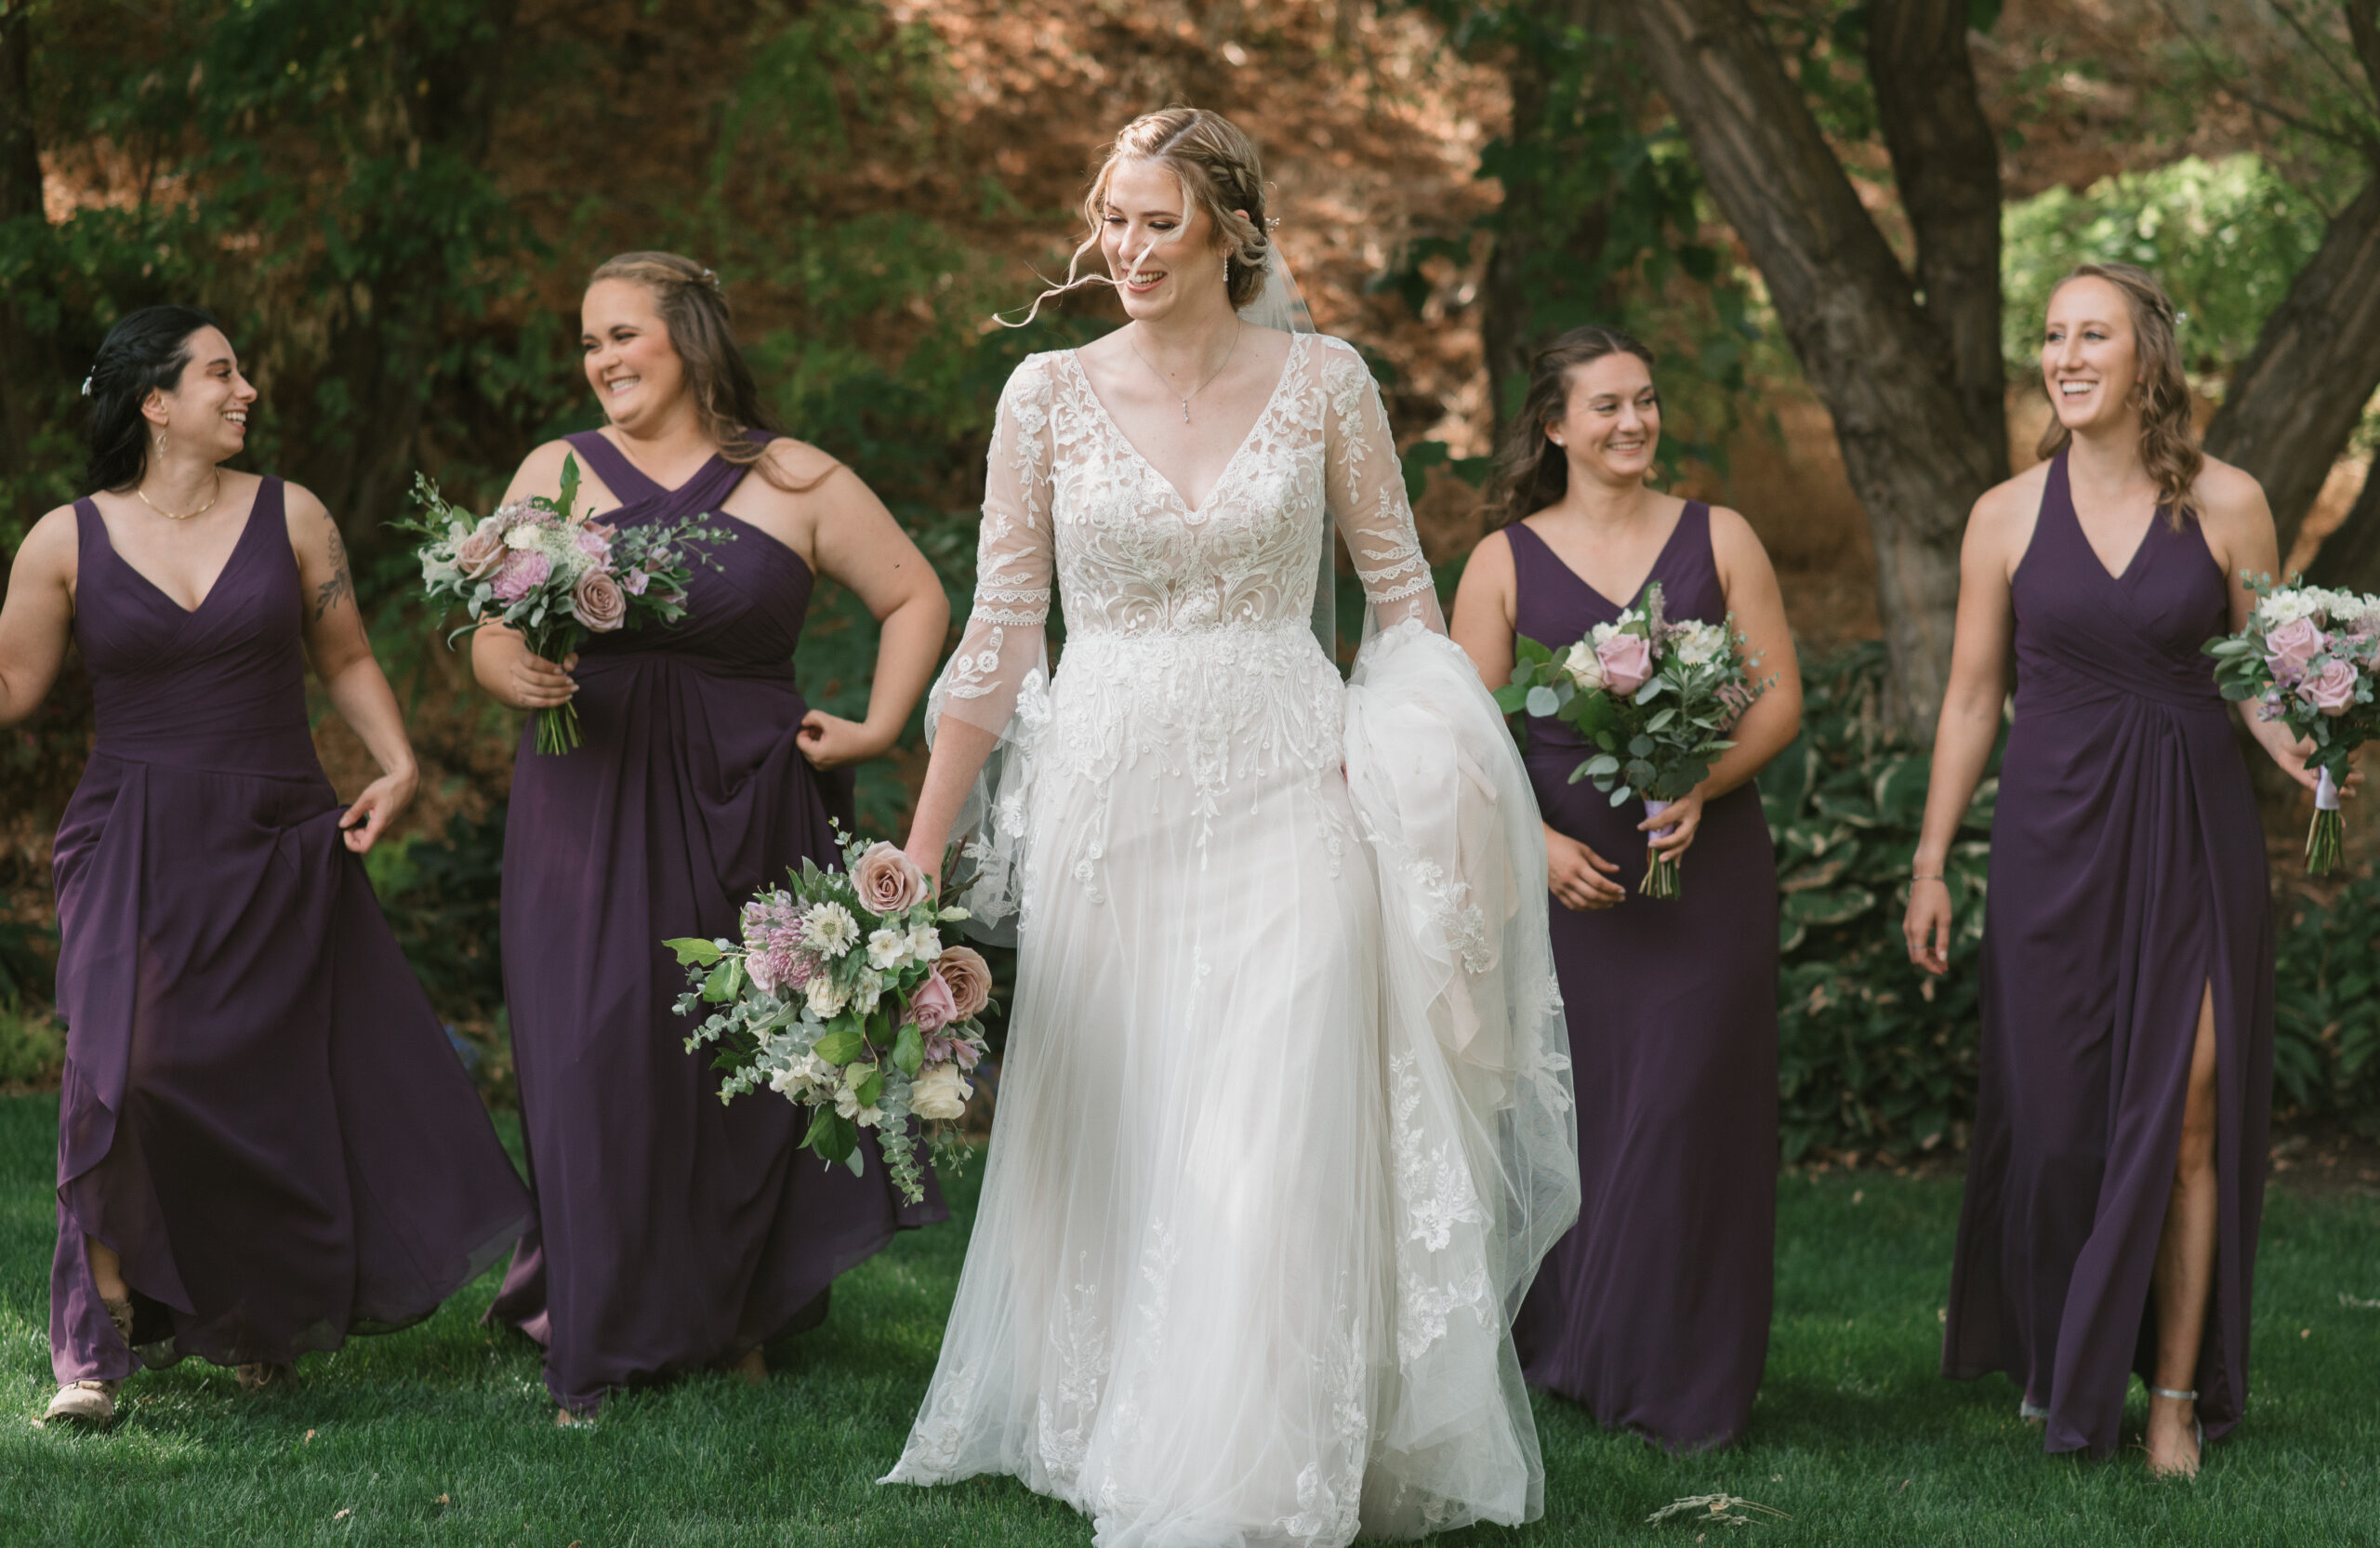 candid wedding photography of bride and bridesmaids walking and smiling